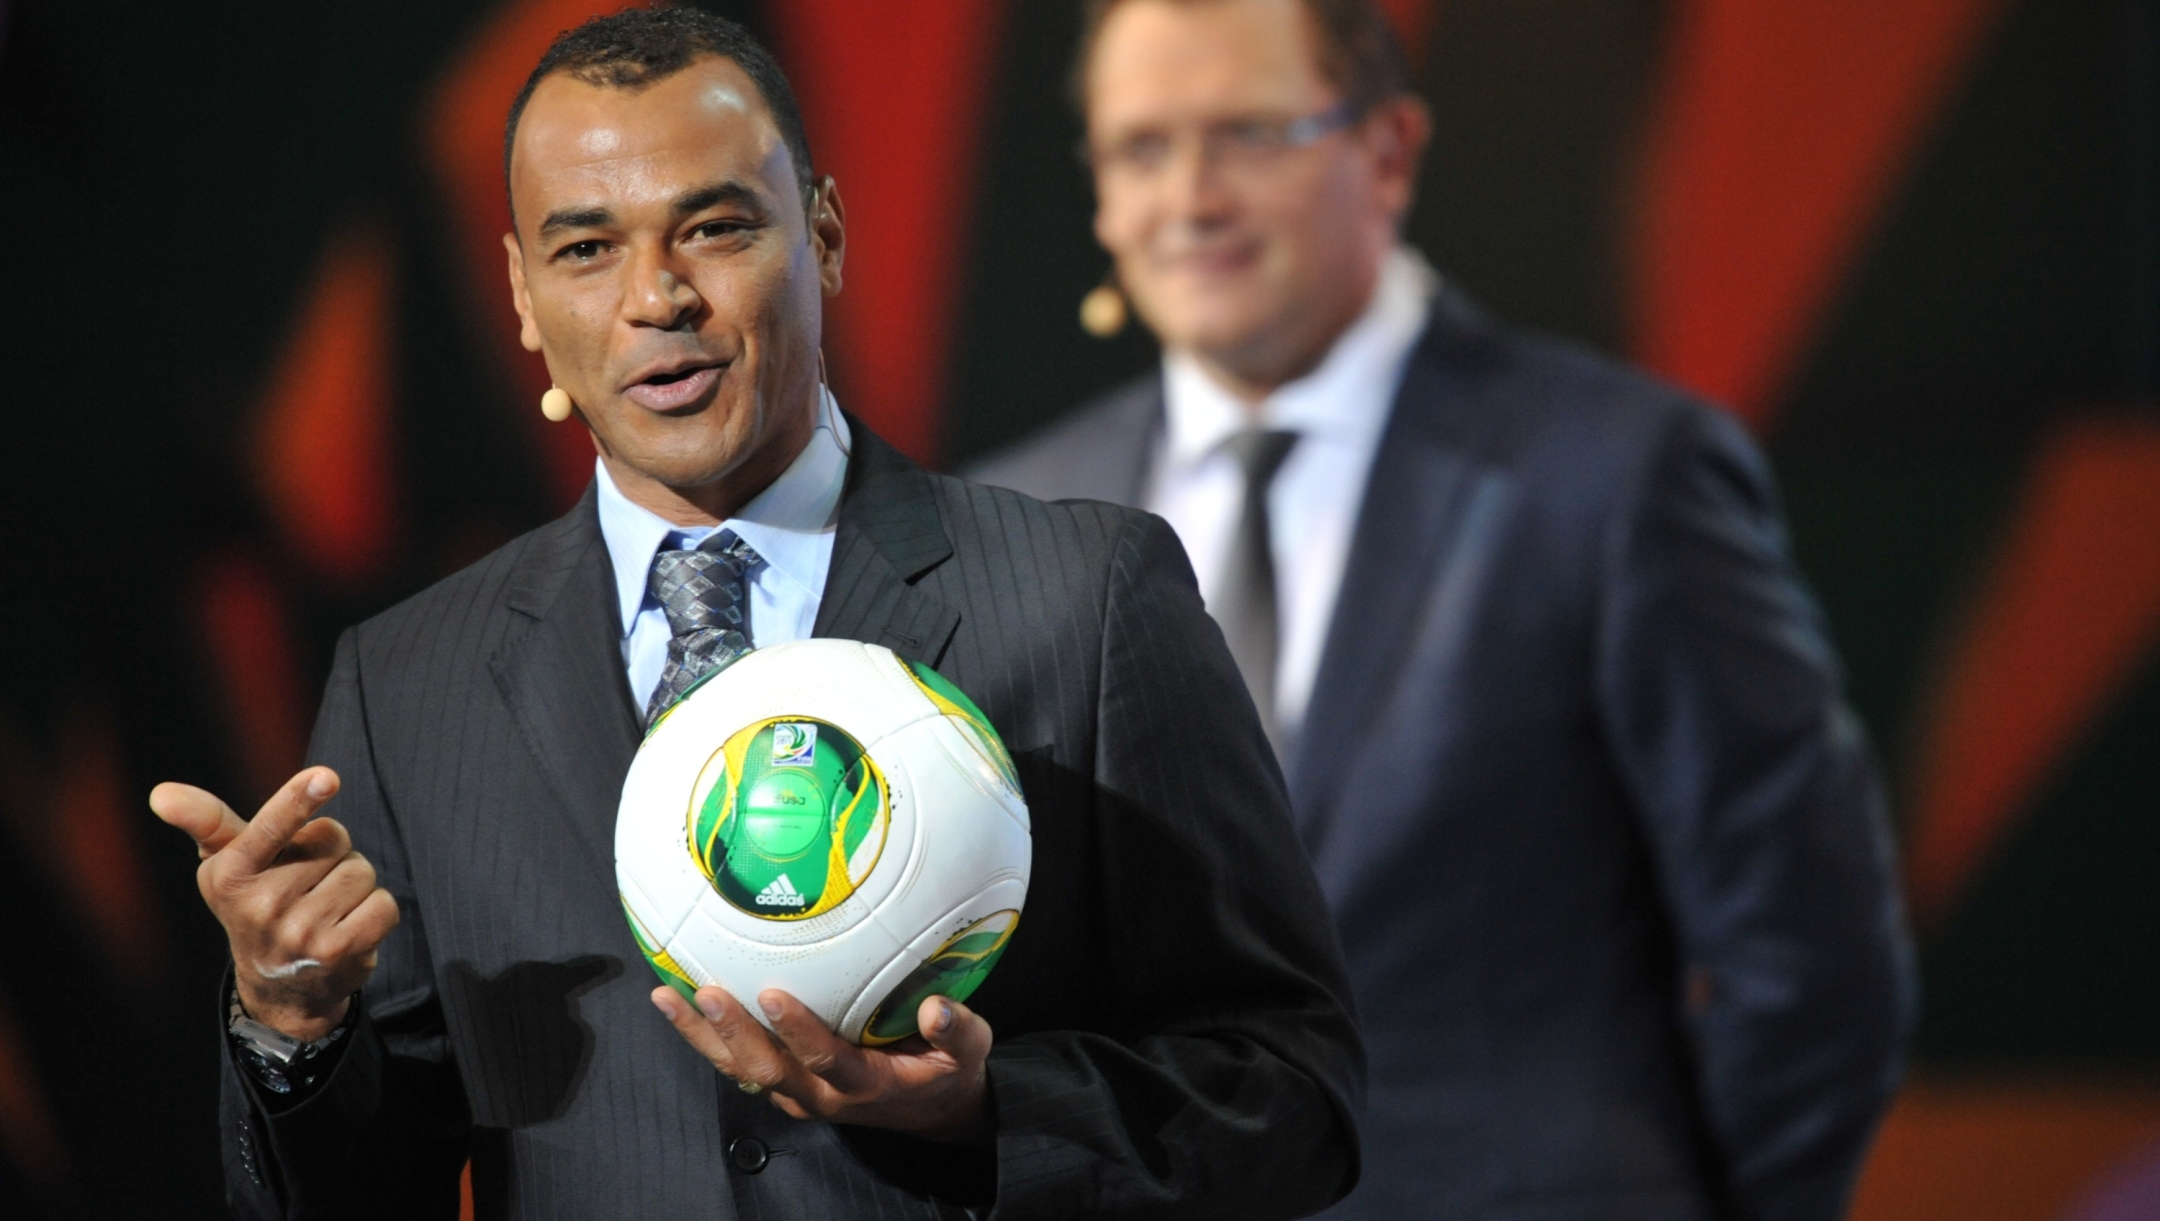 Legendary former Brazil skipper Cafu presents the official ball of the Confederation Cup "Cafusa", during the draw for next June's Confederations Cup Brazil 2013 -- a dress rehearsal for the 2014 World Cup football -- in Sao Paulo, Brazil, on December 1, 2012. The eight-nation event in Brazil brings together four former world champions in reigning top-ranked side Spain, Brazil, Italy and Uruguay. AFP PHOTO / YASUYOSHI CHIBA